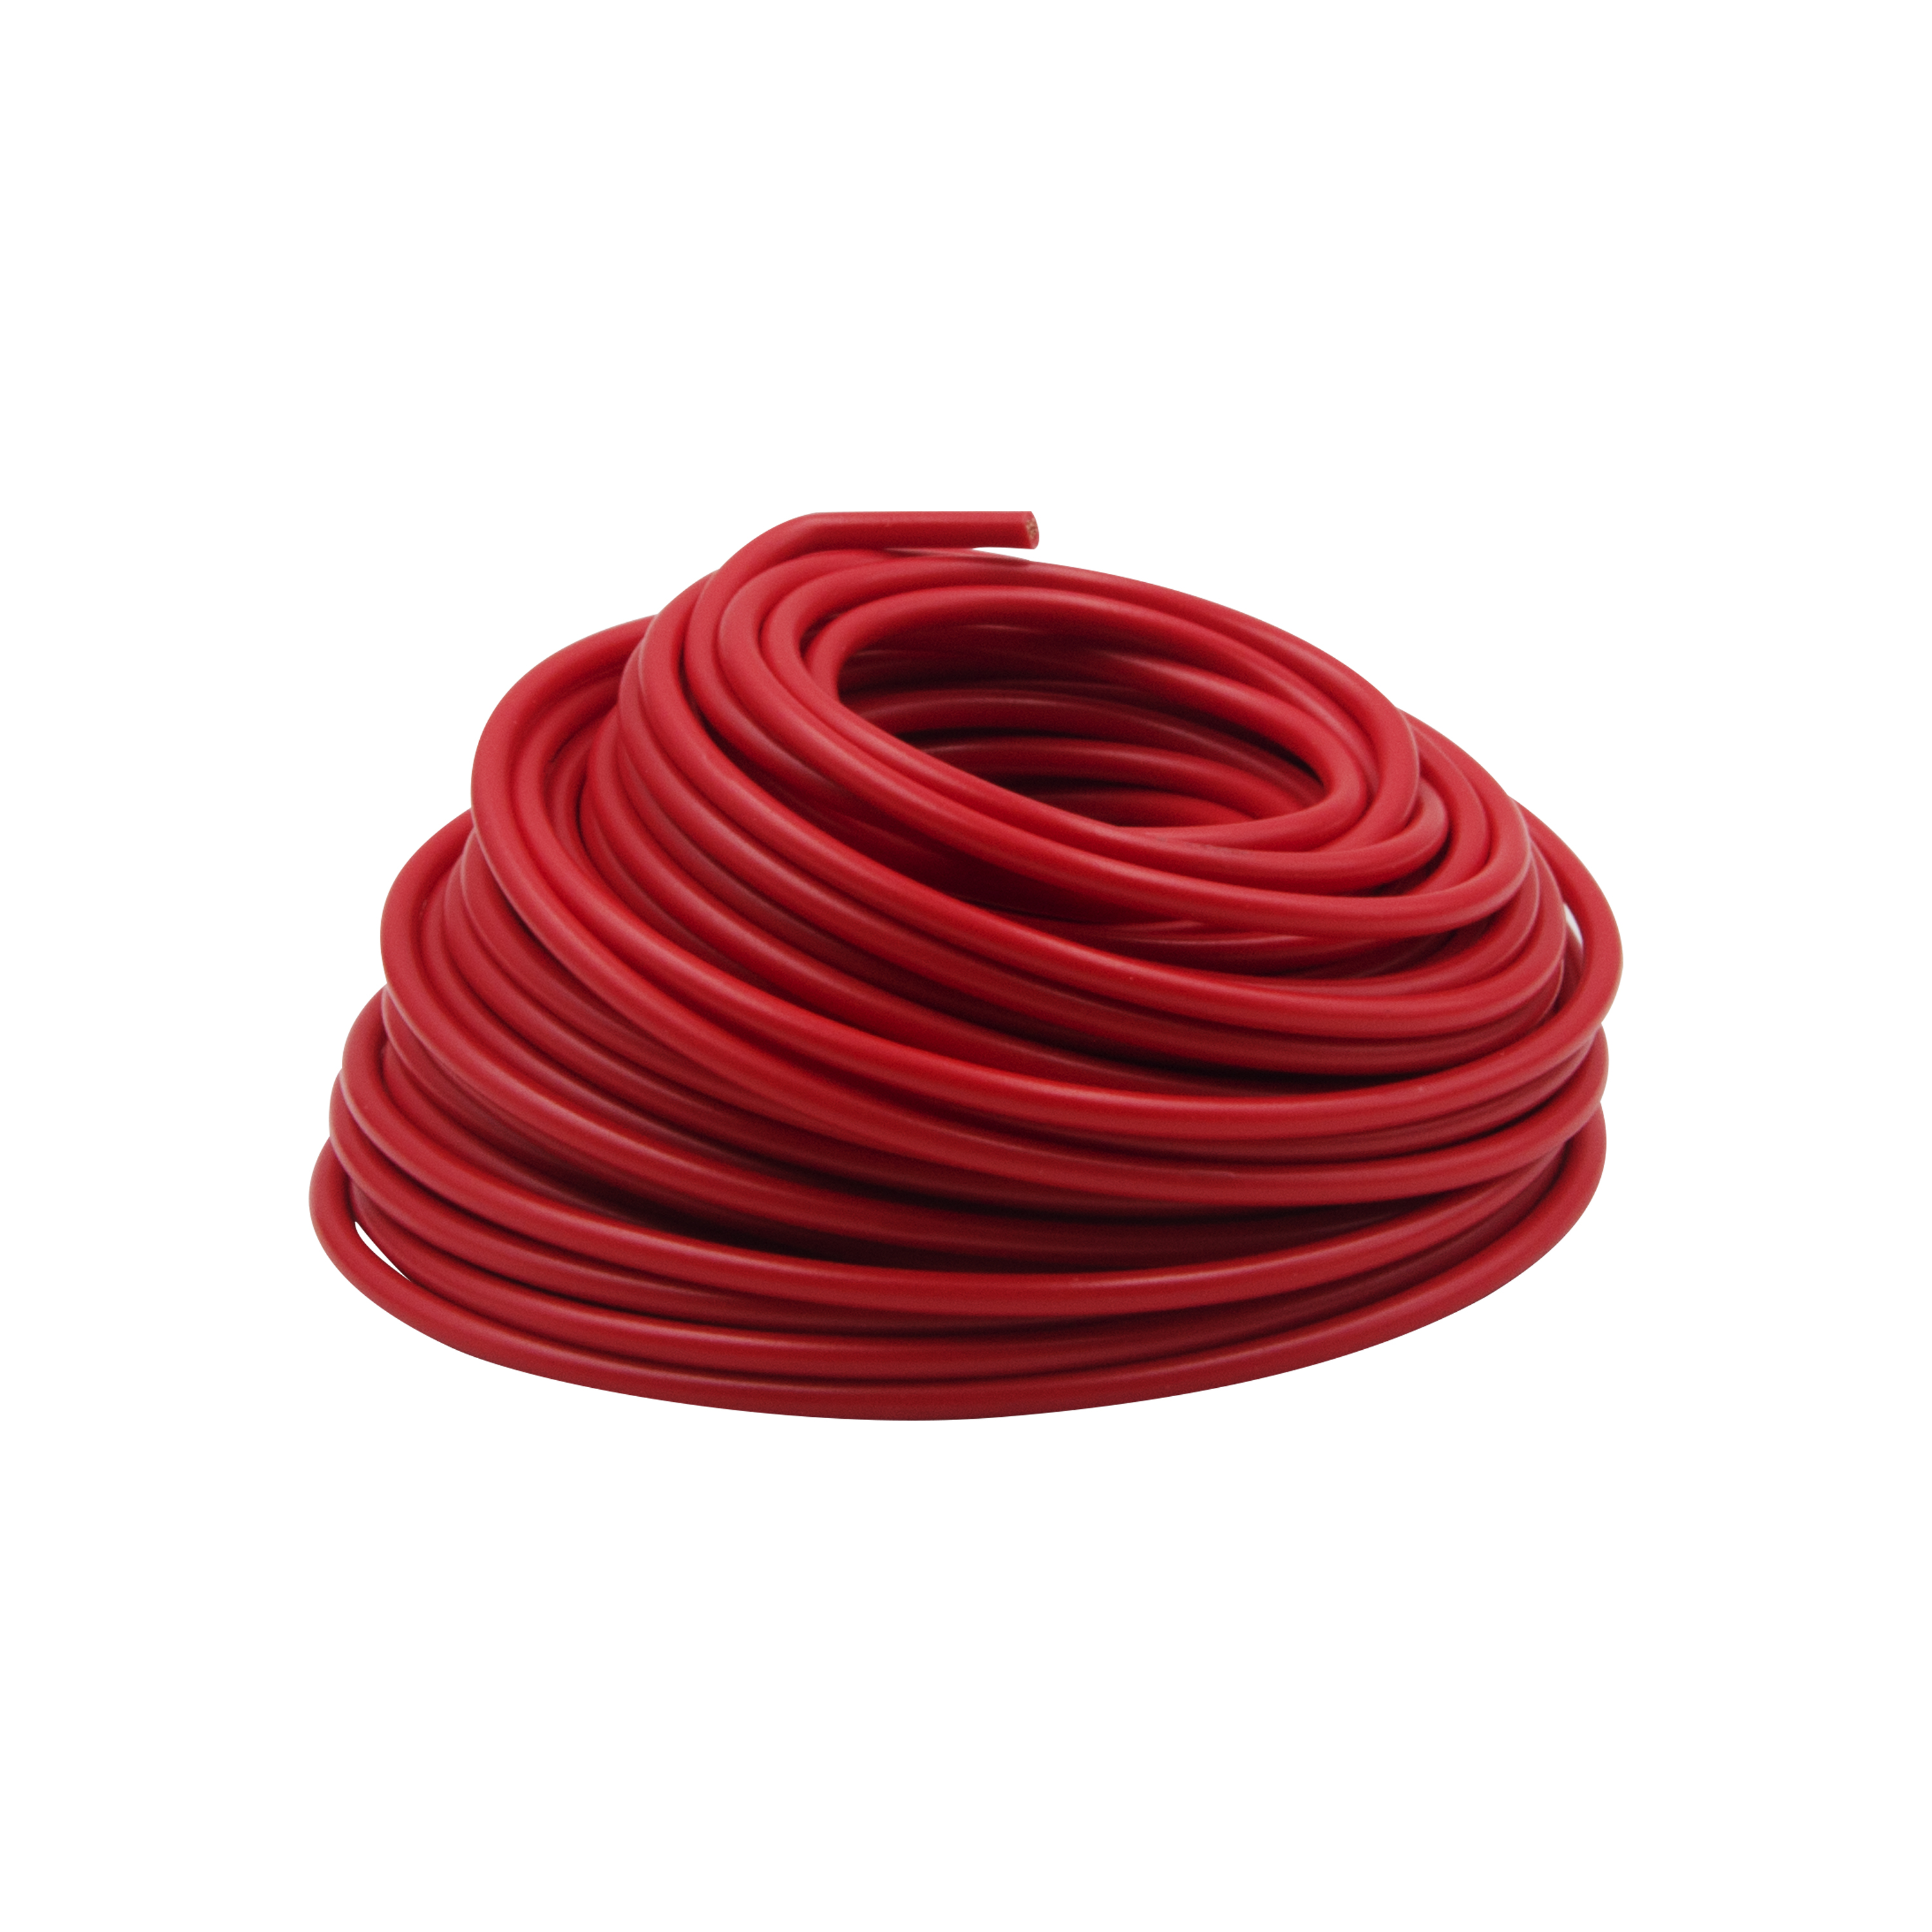 EverStart Universal 12-Gauge Auto Wire, Red, 12 feet, Light Swith to Fuse Block or Relay for Car - image 5 of 8